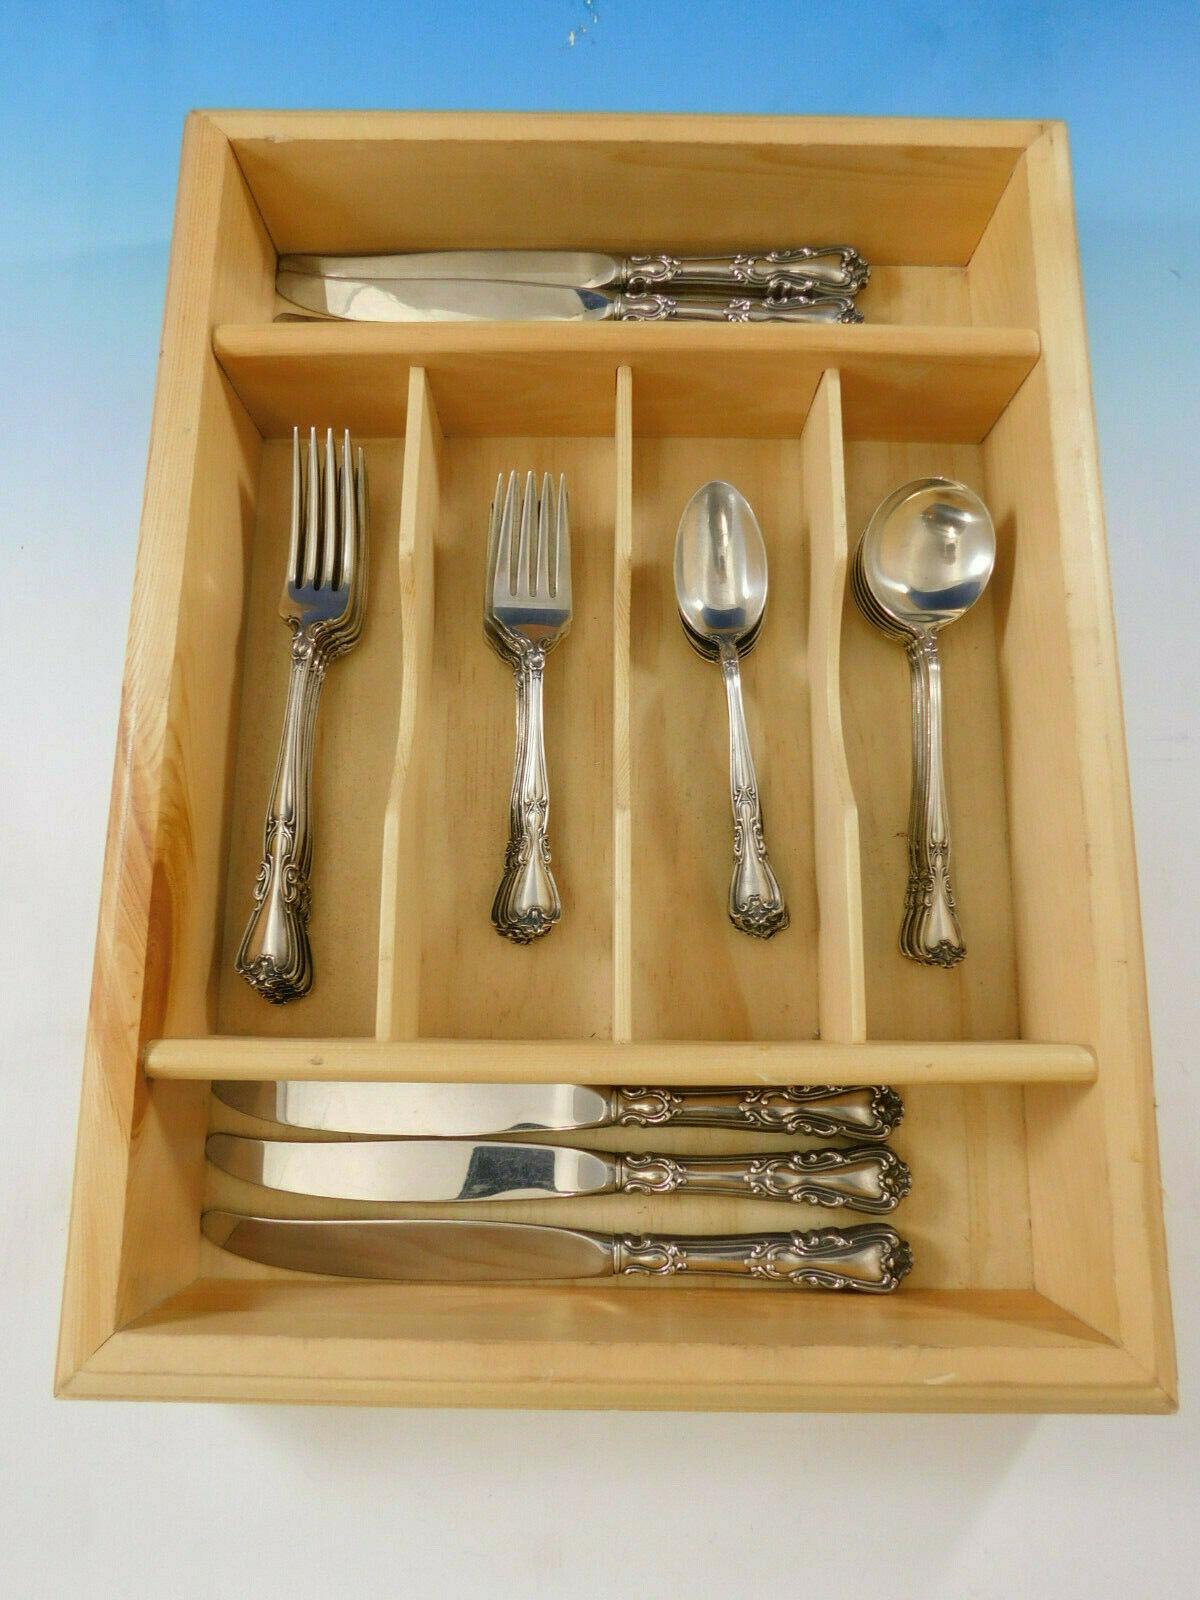 Victoria by Watson-Wallace, introduced in the year 1900, sterling silver Flatware set, 30 pieces. This set includes:

 6 knives, 8 7/8